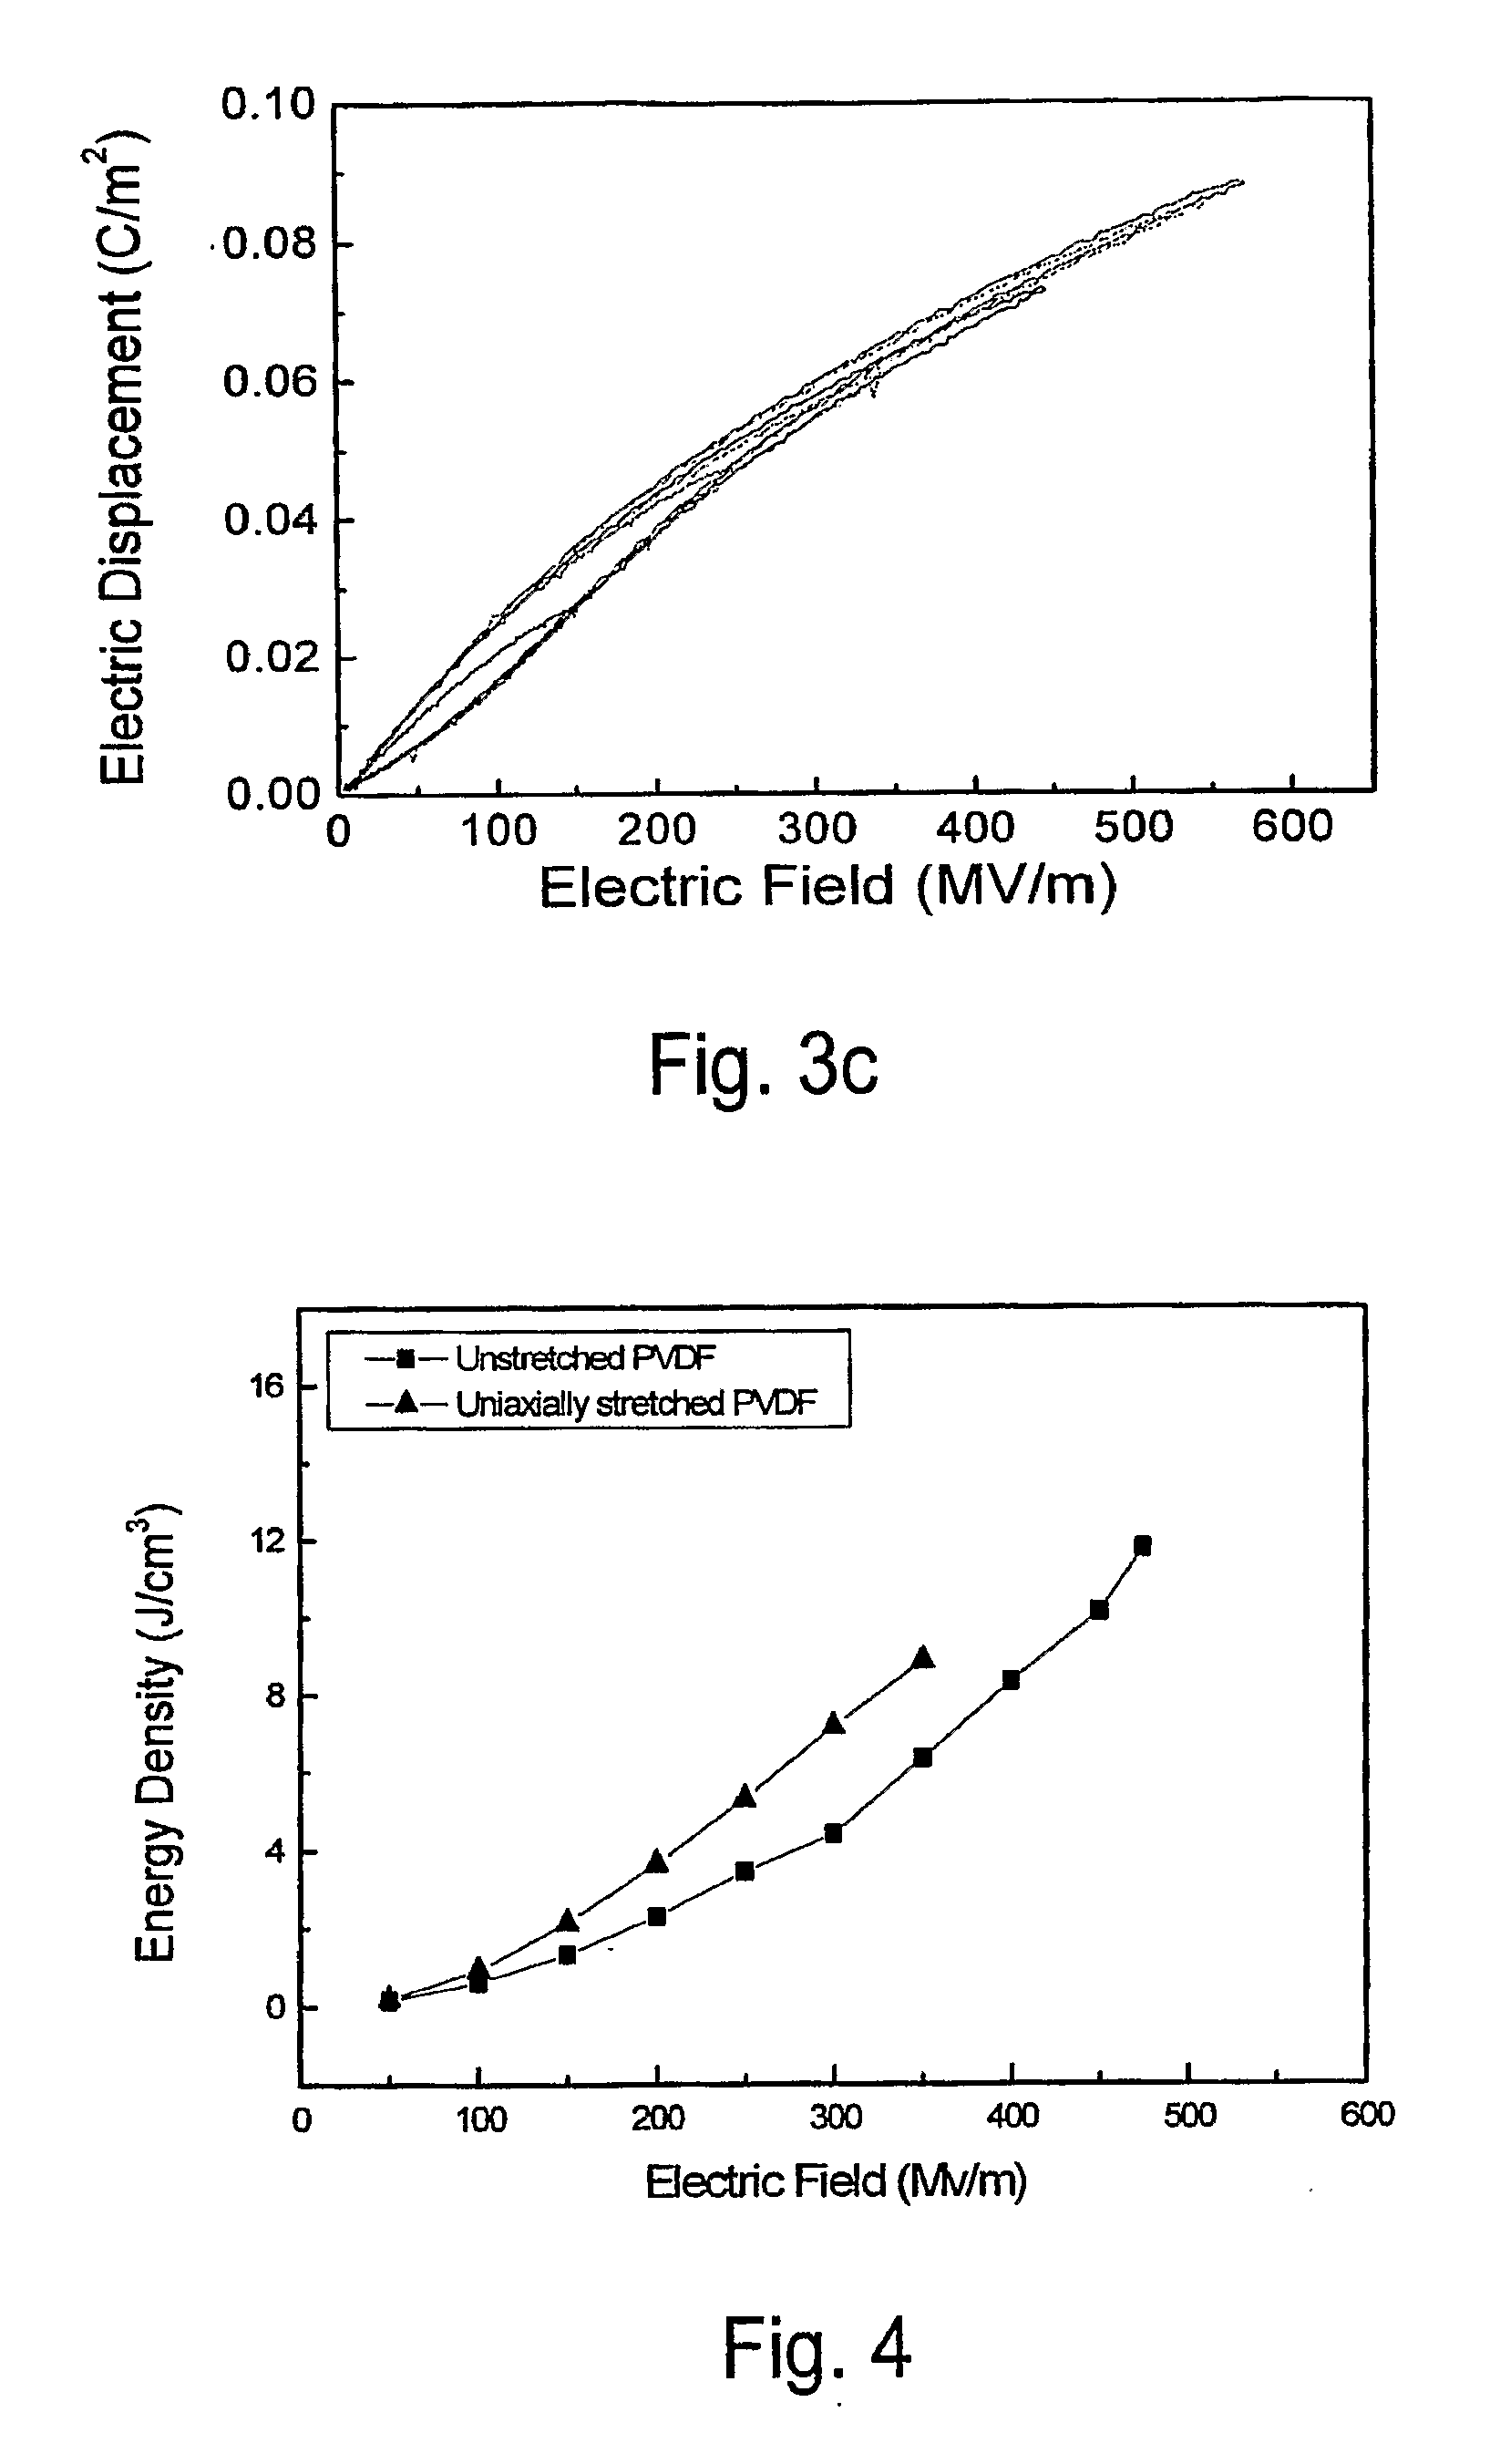 High Electric Energy Density Polymer Capacitors With Fast Discharge Speed and High Efficiency Based On Unique Poly (Vinylidene Fluoride) Copolymers and Terpolymers as Dielectric Materials